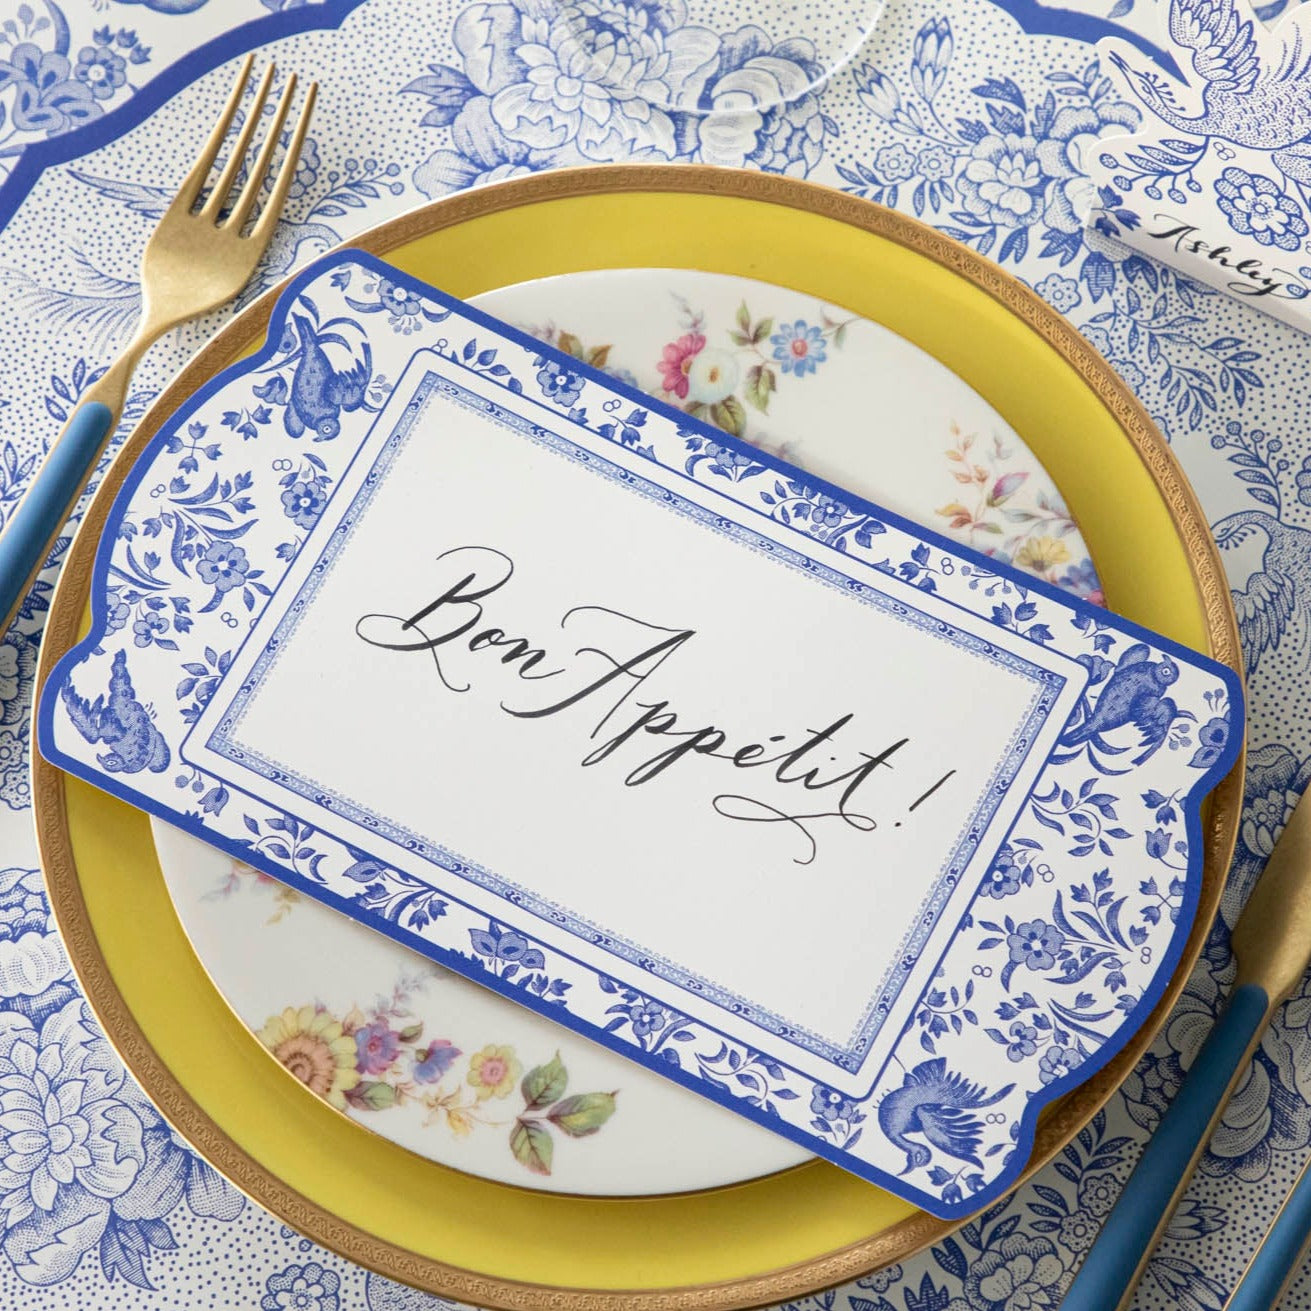 An elegant blue and white place setting featuring a Blue Regal Peacock Table Card with &quot;Bon Appetit&quot; written on it in beautiful cursive resting on the plate.